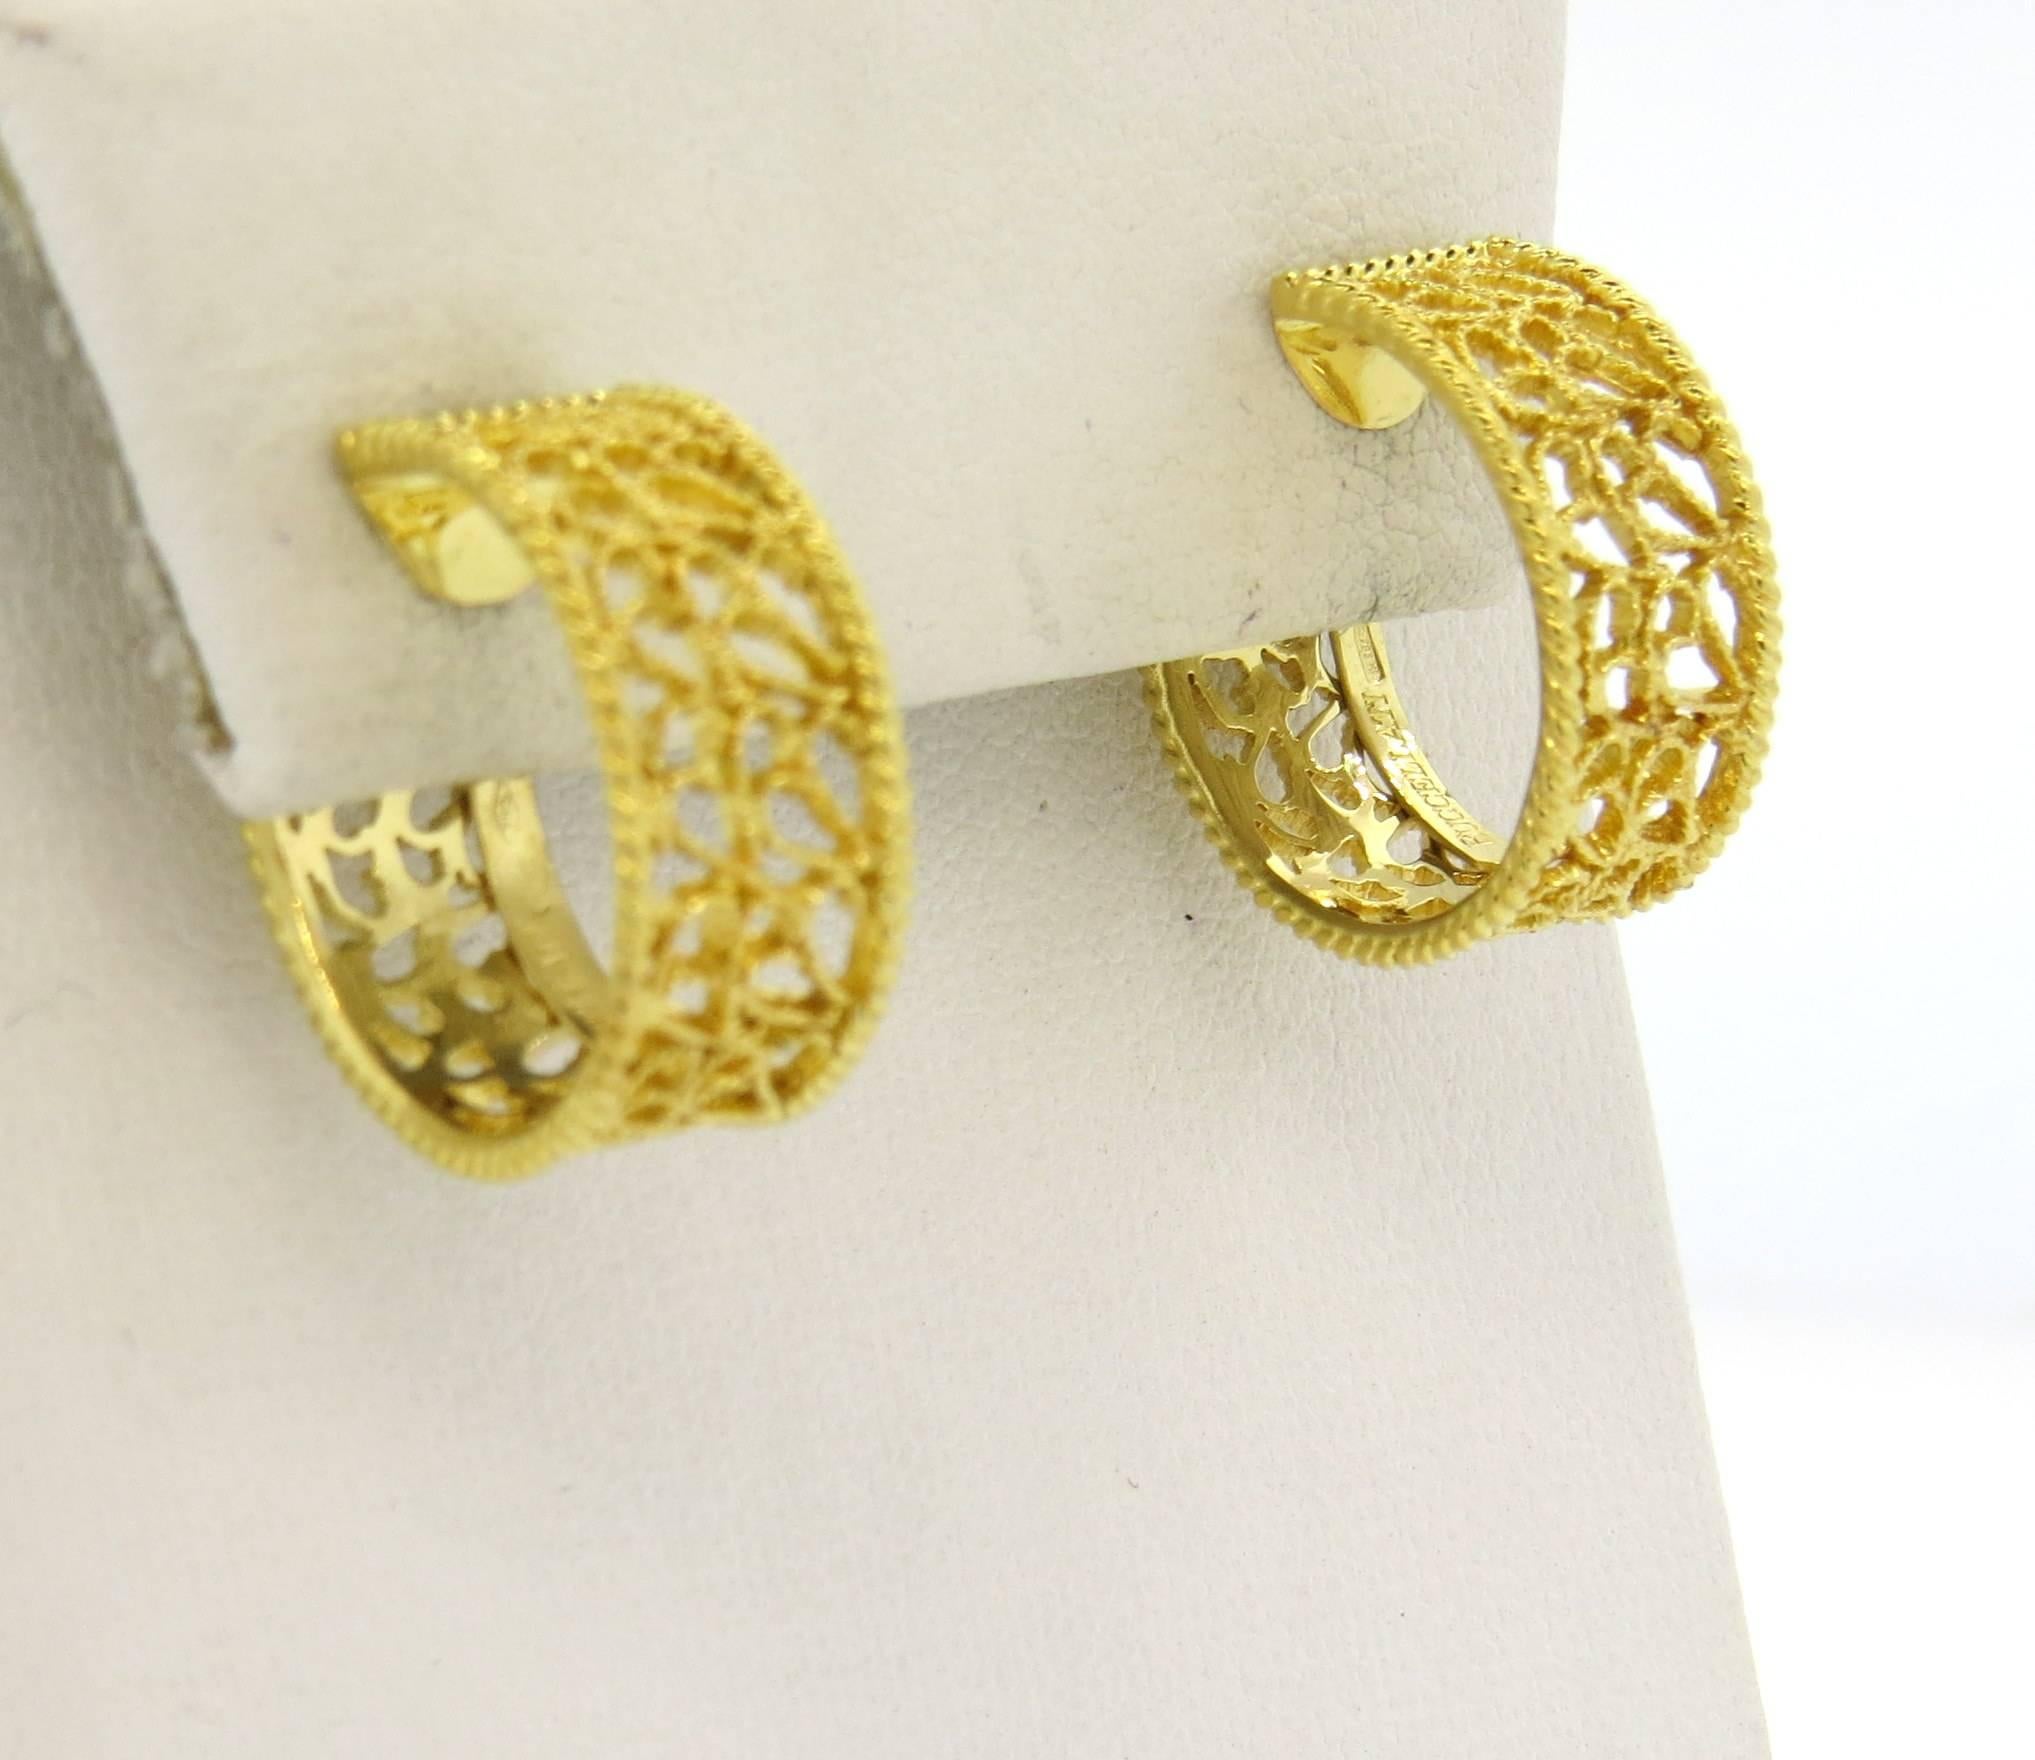 A pair of 18k yellow gold Buccellati hoop earrings, measuring 19mm in diameter x 9mm wide. Marked: Buccellati 750. Weight - 7.4 grams
Come with original Buccellati paperwork 